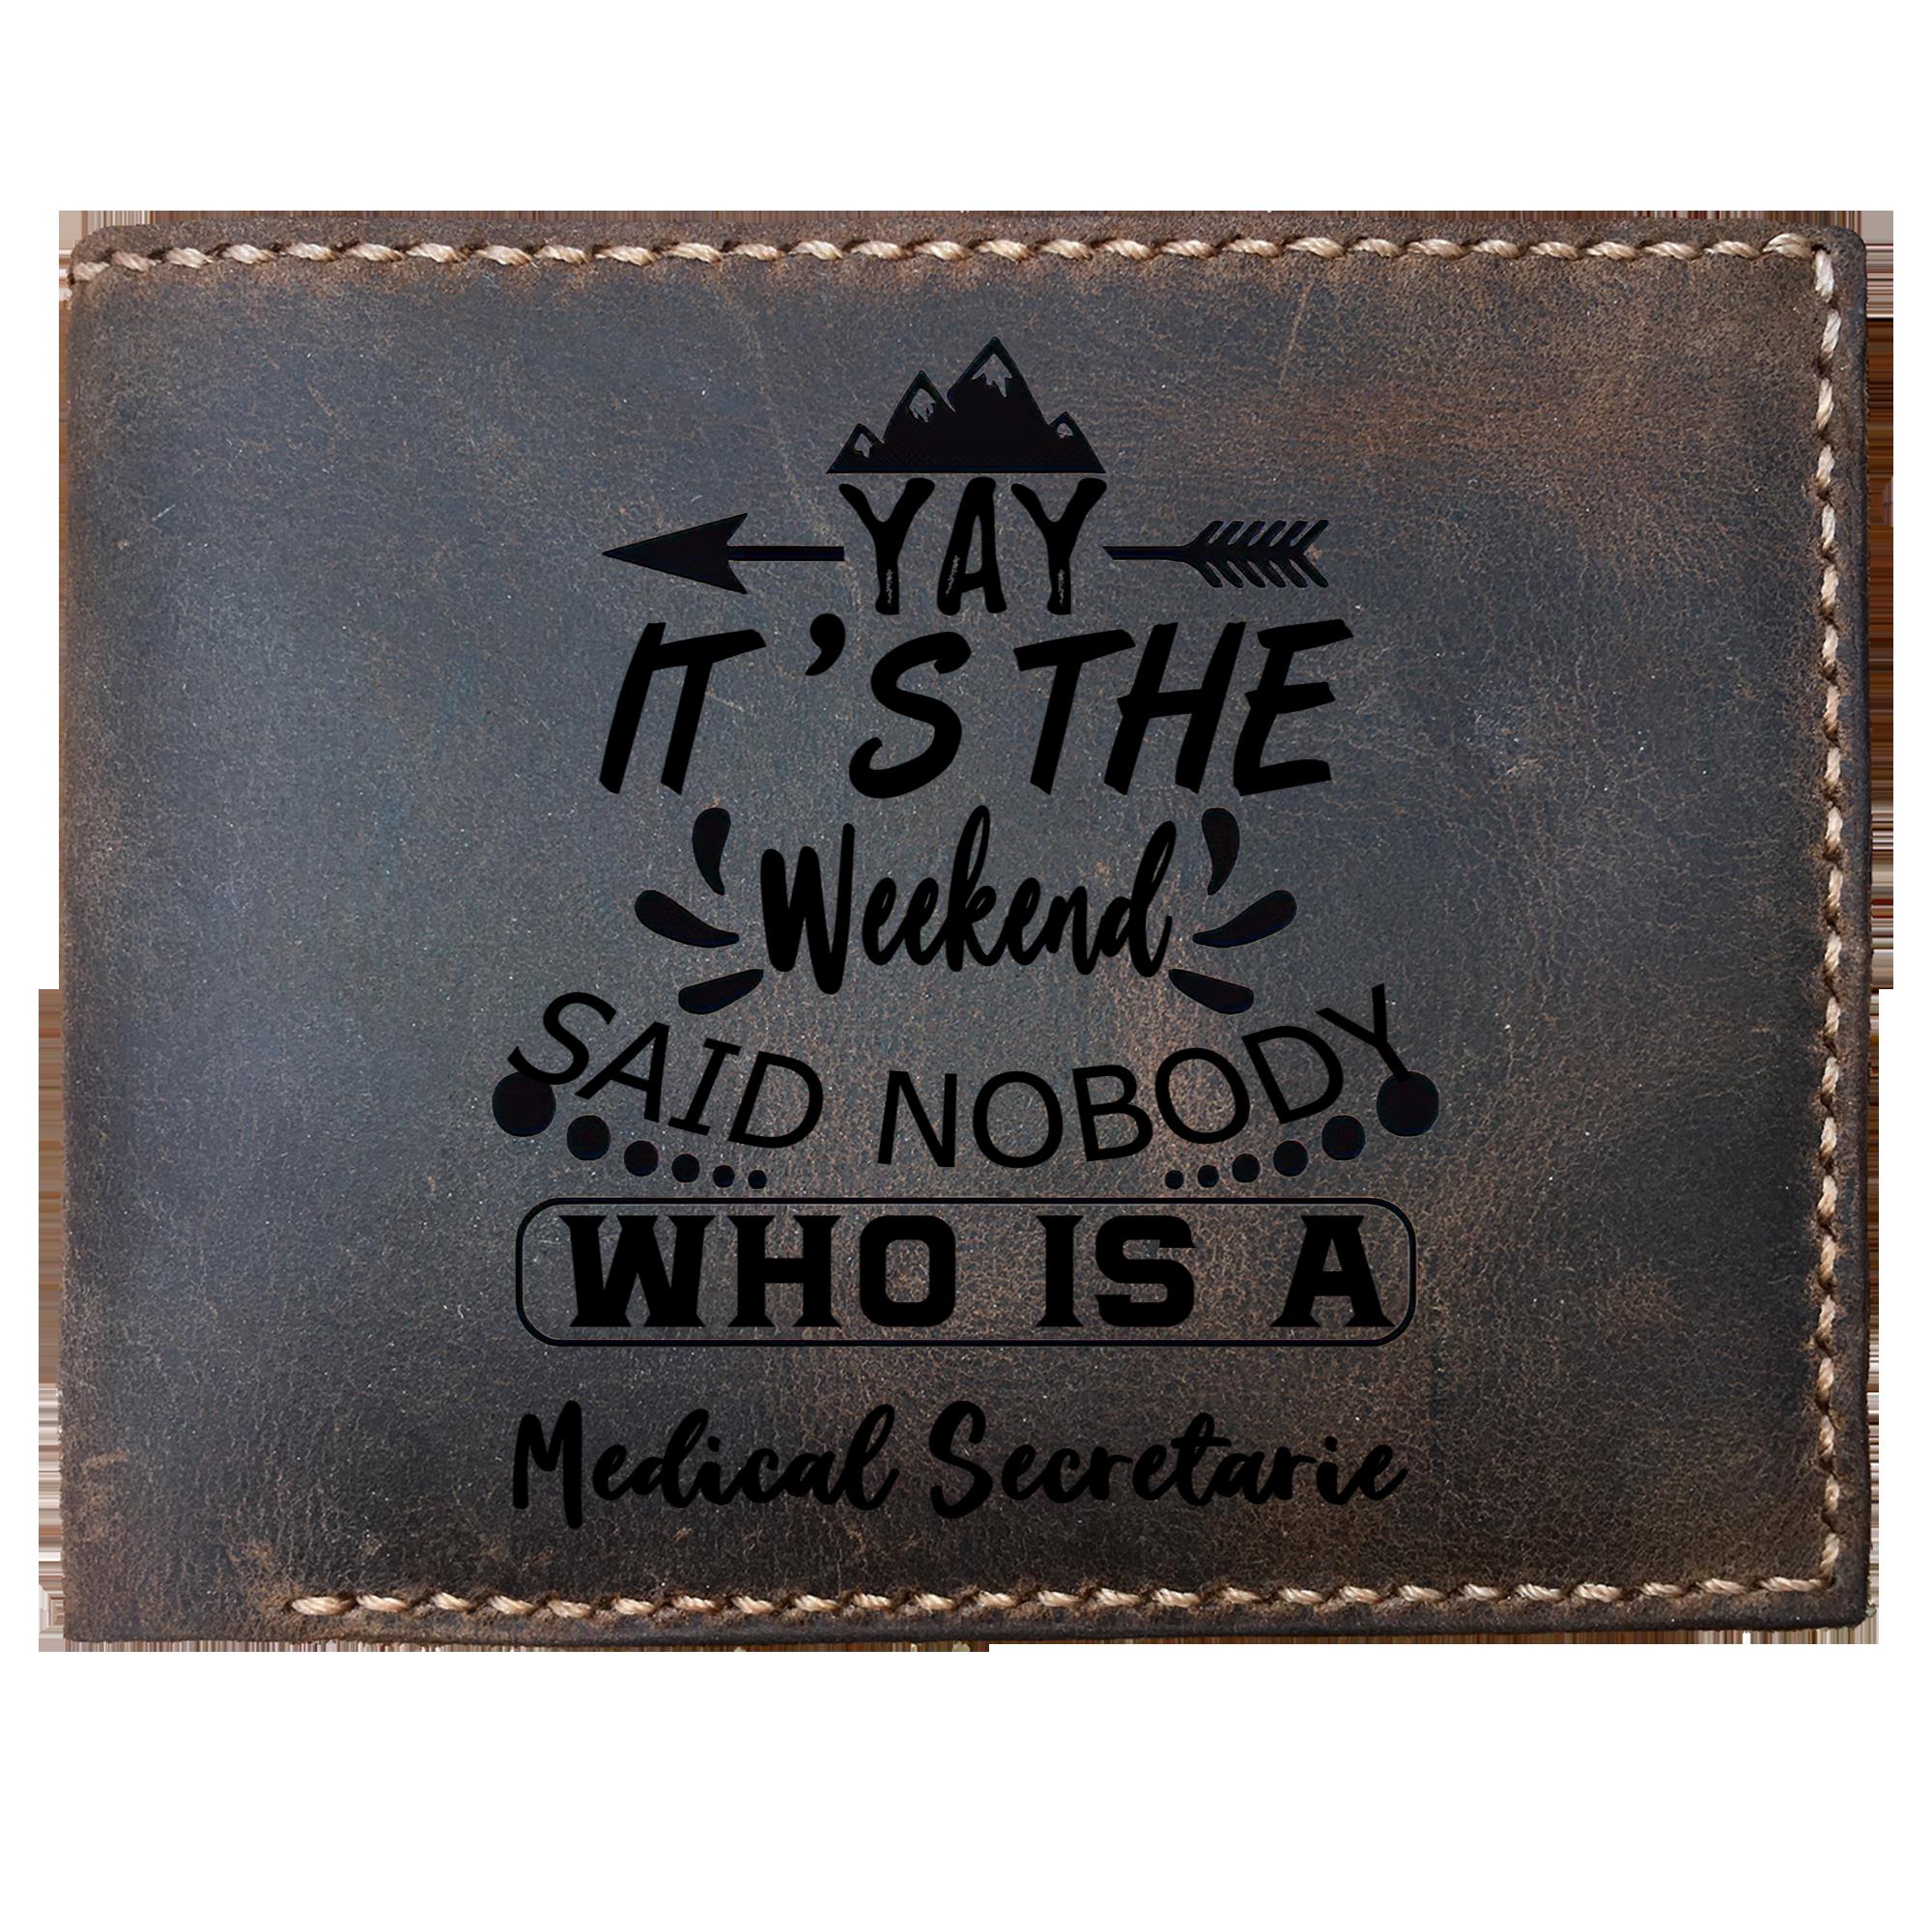 Skitongifts Funny Custom Laser Engraved Bifold Leather Wallet For Men, It's The Weekend Said Nobody Who Is A Medical Secretarie, Father's Day Gifts